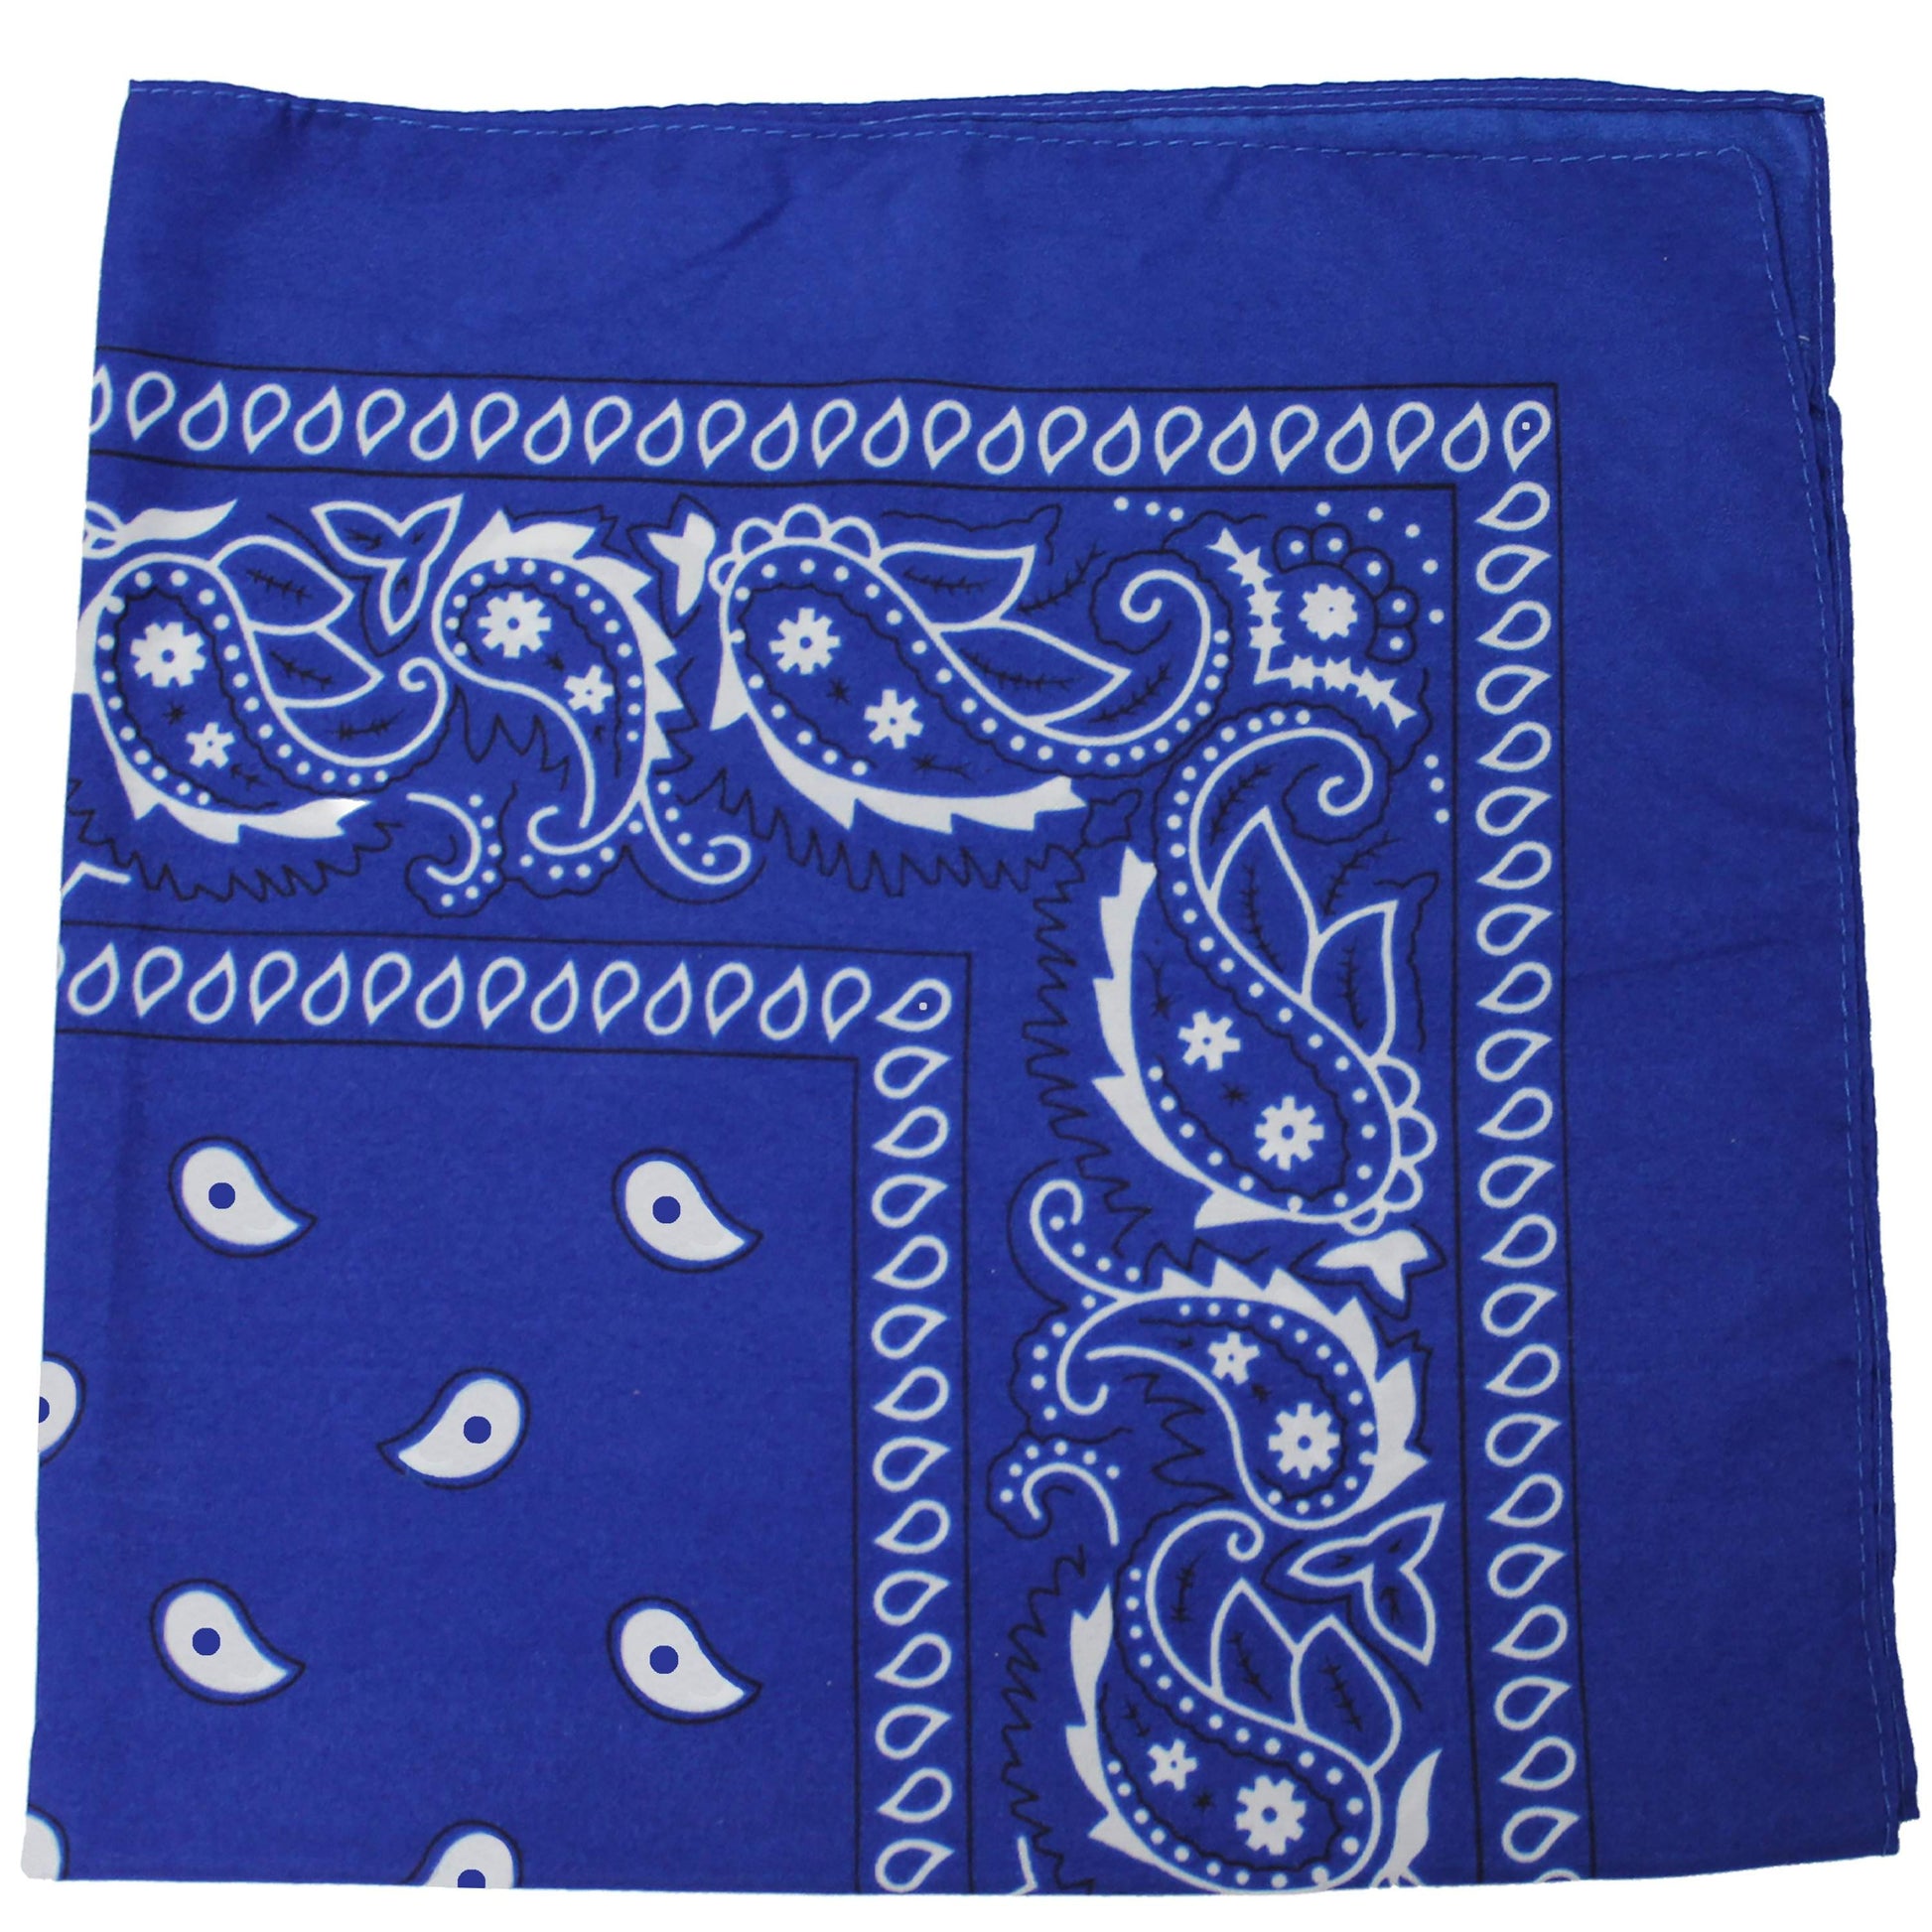 Pack of 4 X-Large Paisley Cotton Printed Bandana - 27 x 27 inches